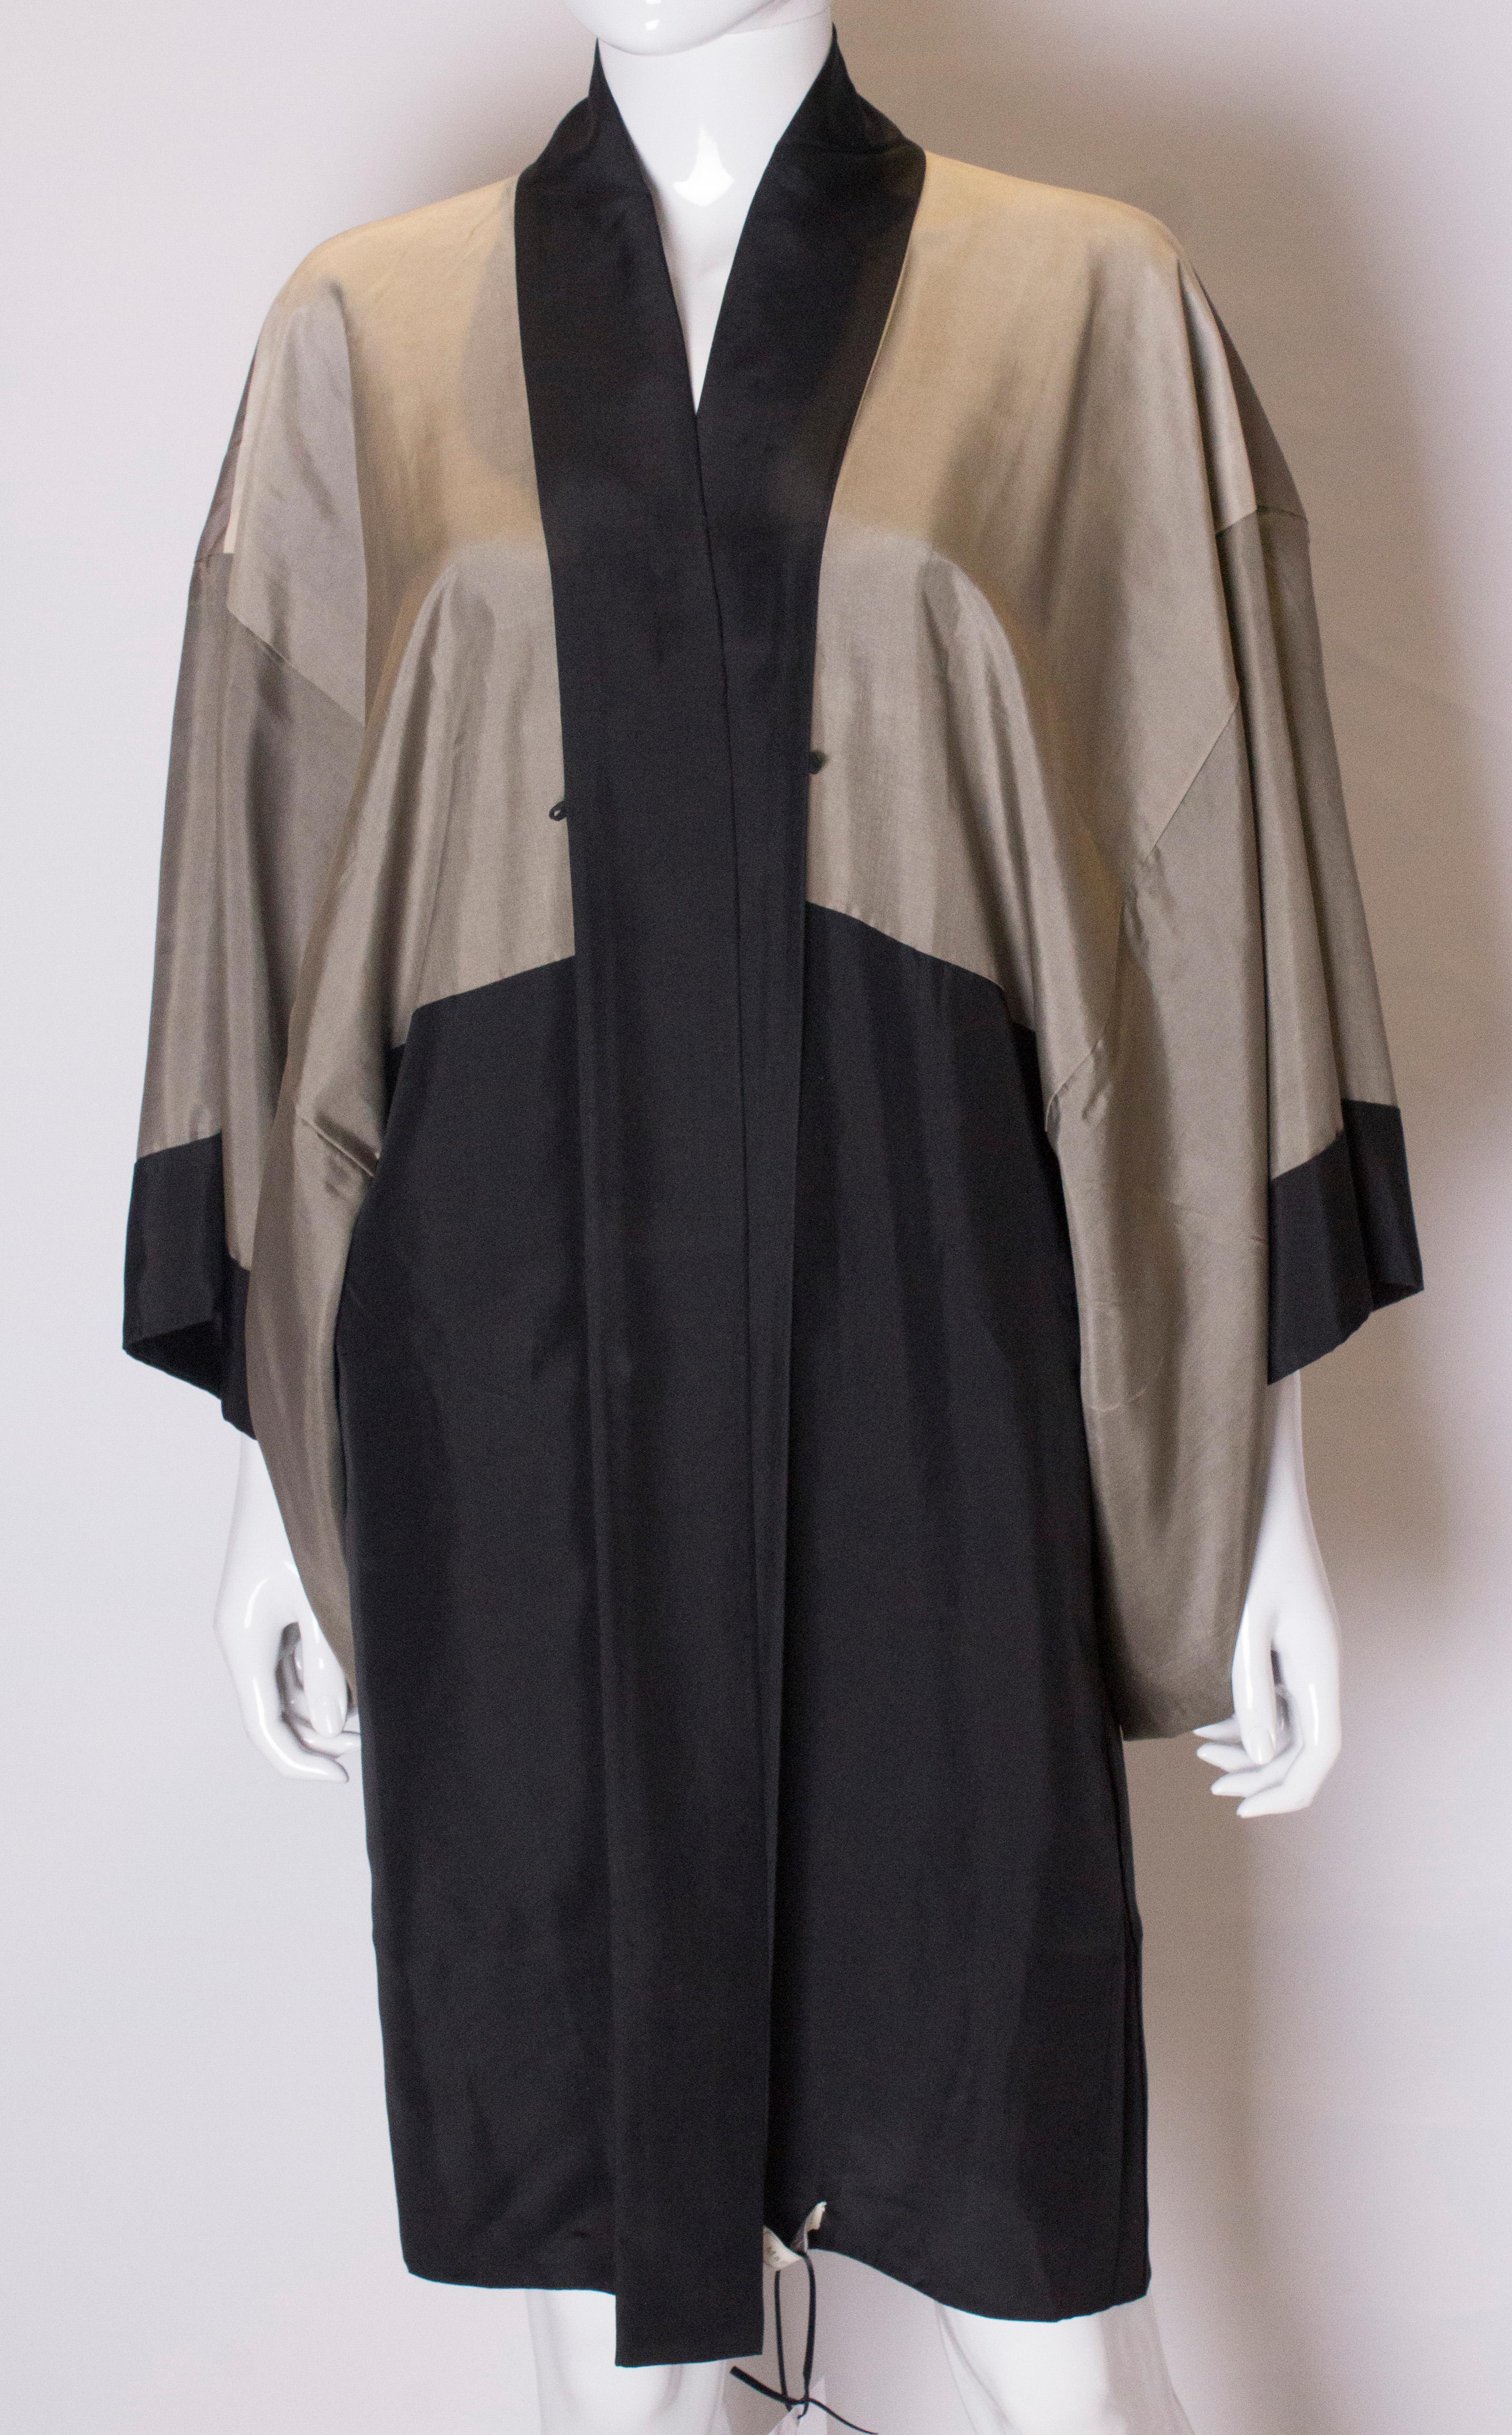 A chic vintage silk kimono.  The kimono is reversible and can be worn in two ways,one version is the plain black with white circular print, the other is with the hand painted picture of the tiger on the outside.
Measurements; Bust up to 40'', length